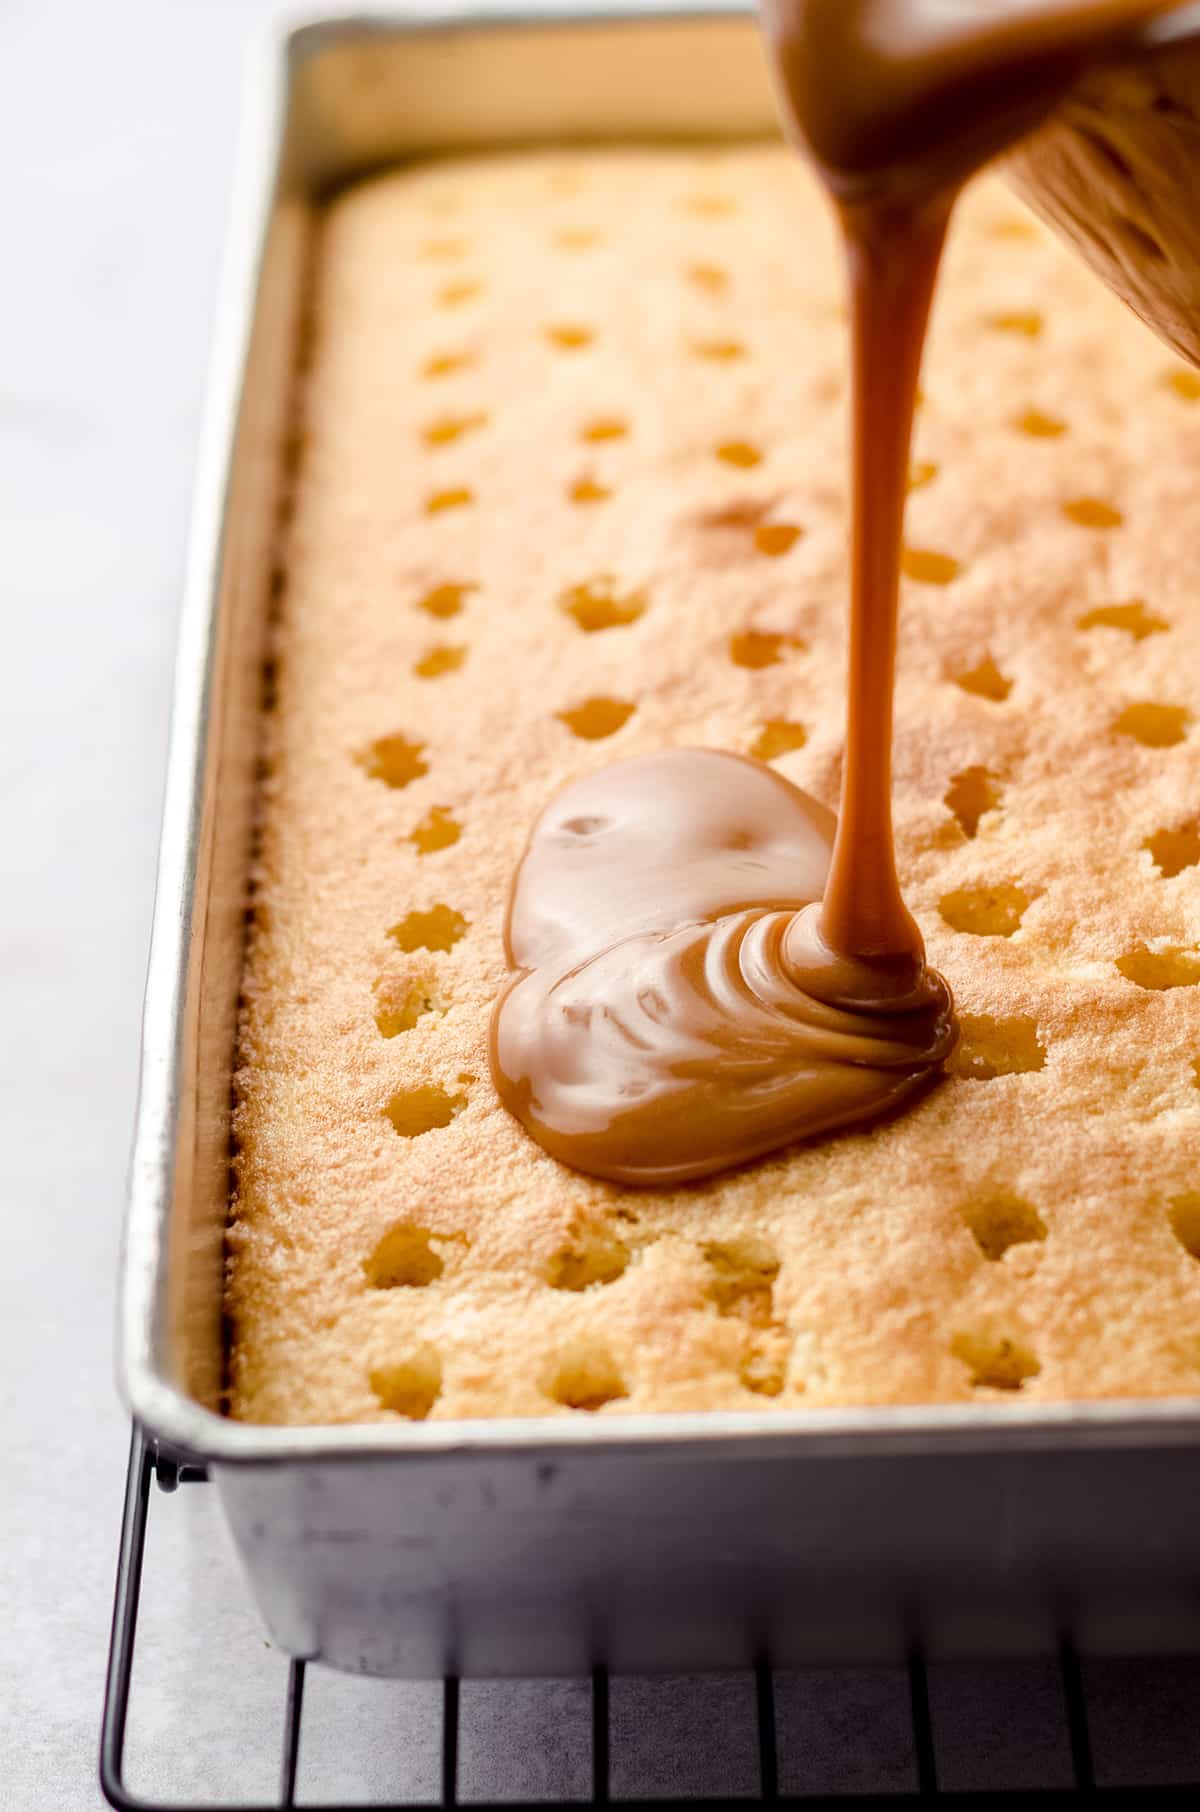 Pouring caramel sauce on top of a poke cake.